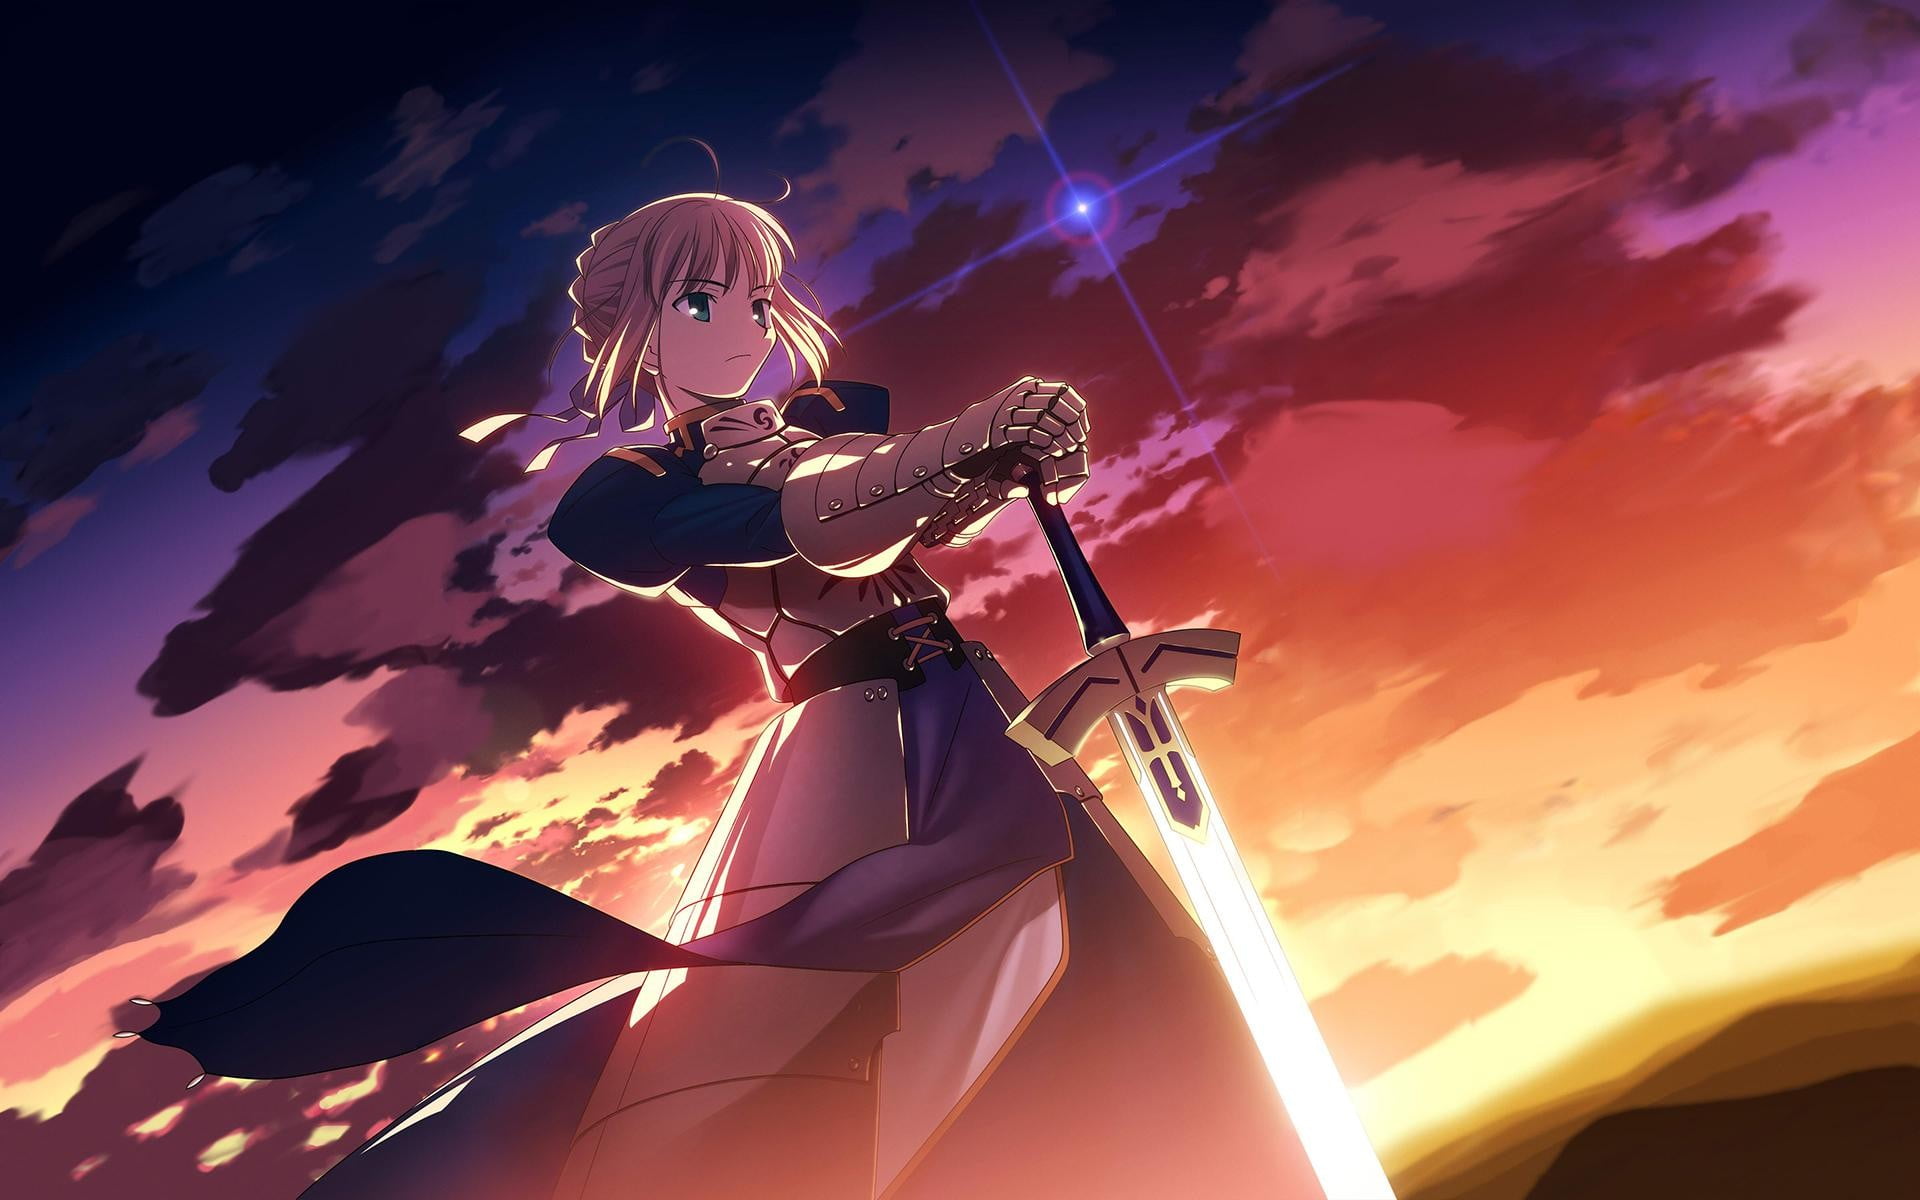 Saber, Fate Series, sky, one person, women, nature, sunset